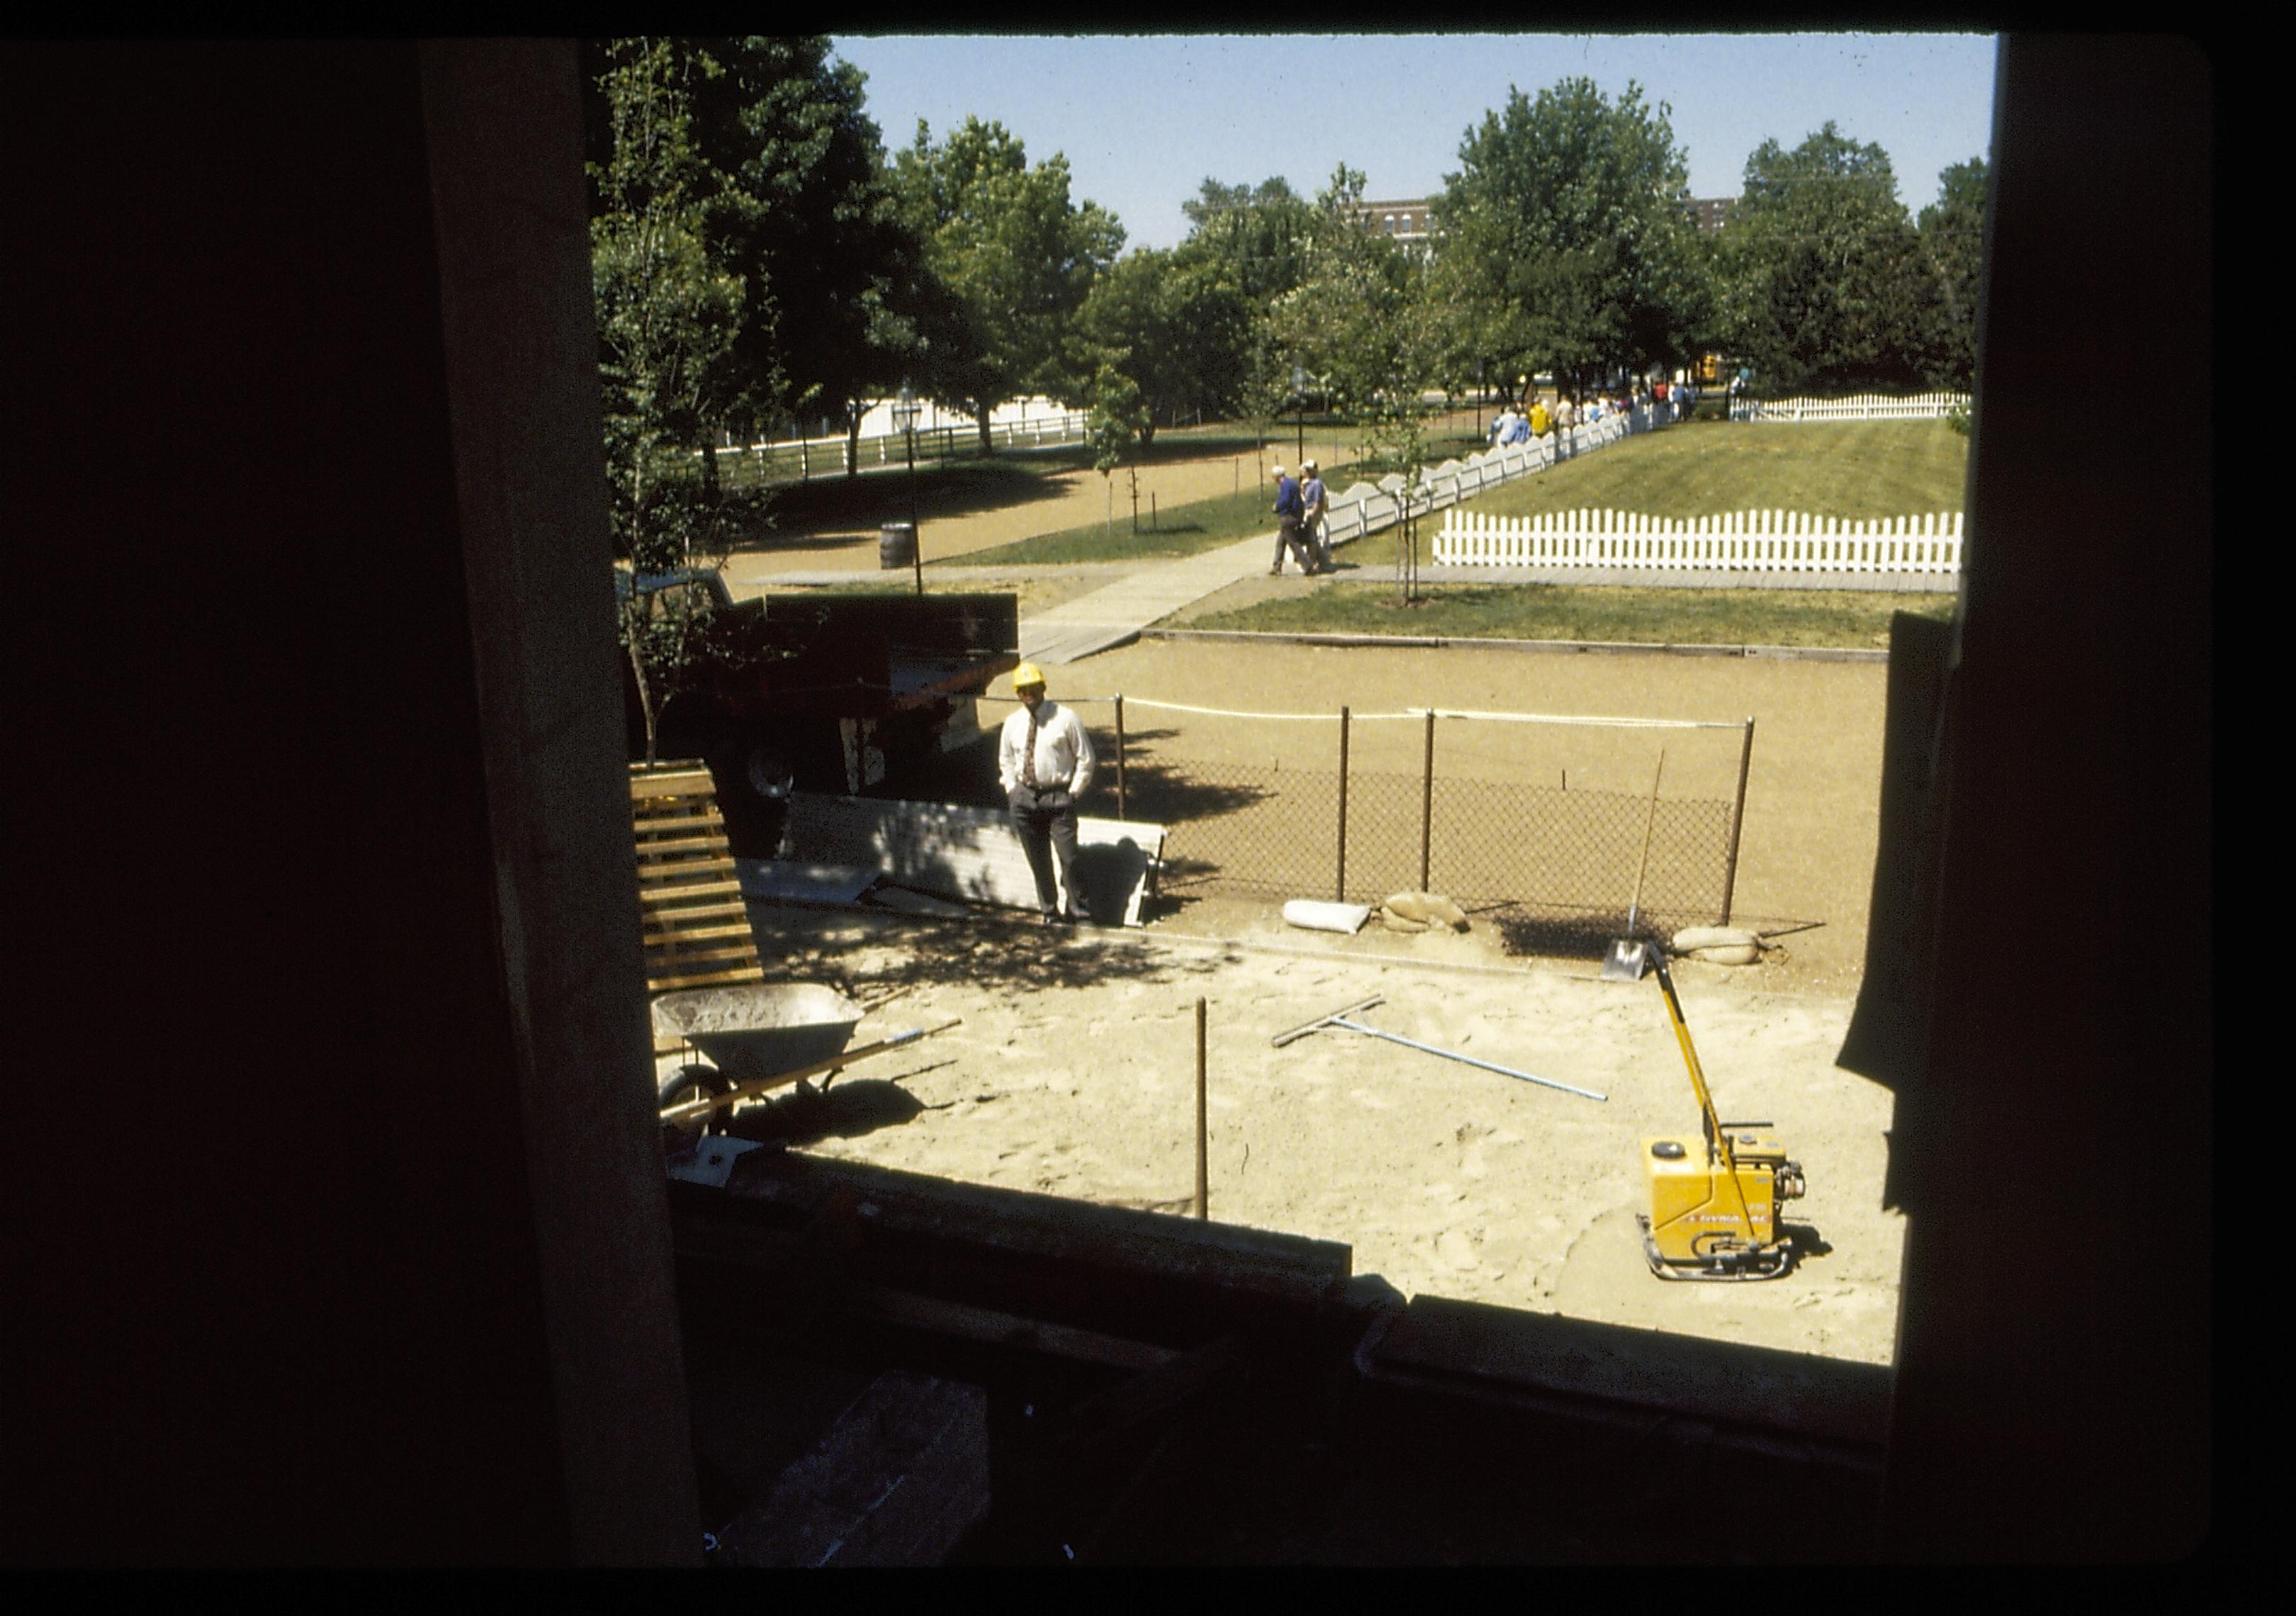 Laing the sand substrate of the Lincoln Home brick plaza. West entrance/door frame of Lincoln Home in foreground. Burch lot in background. Photographer facing west.